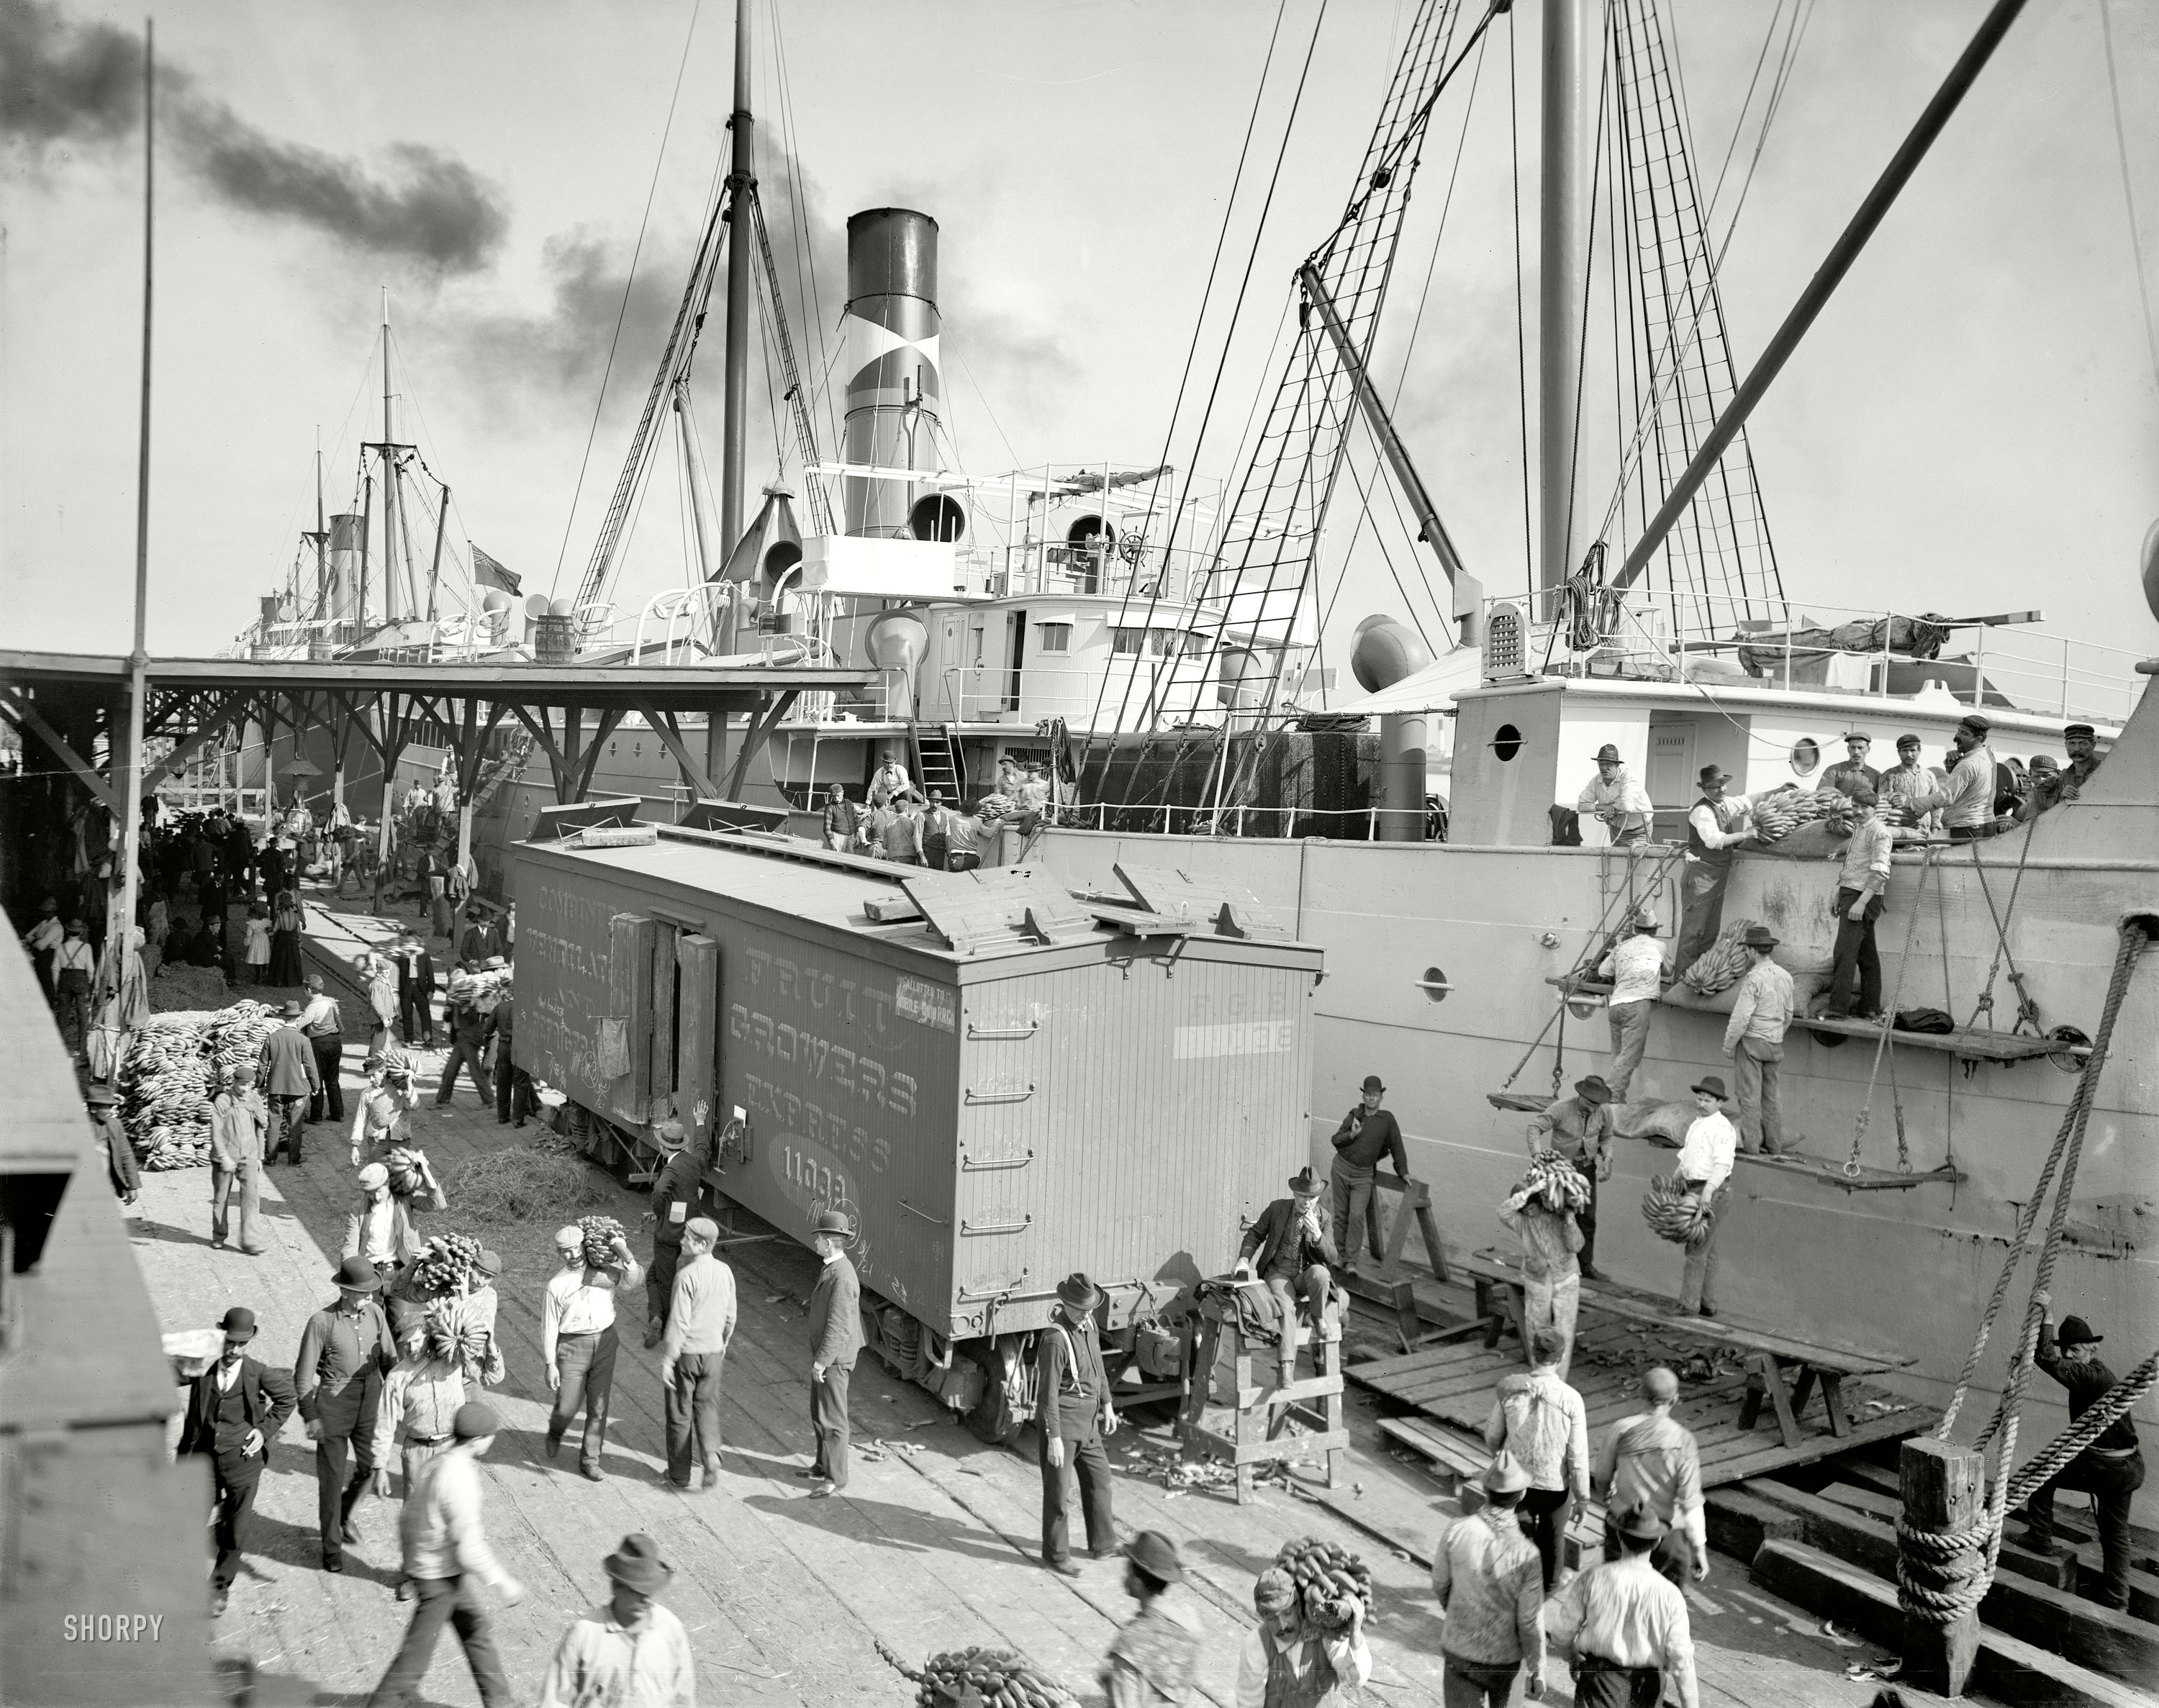 Circa 1903. "Unloading bananas at New Orleans, Louisiana." An alternate view of this scene. 8x10 inch glass negative, Detroit Publishing Co. View full size.